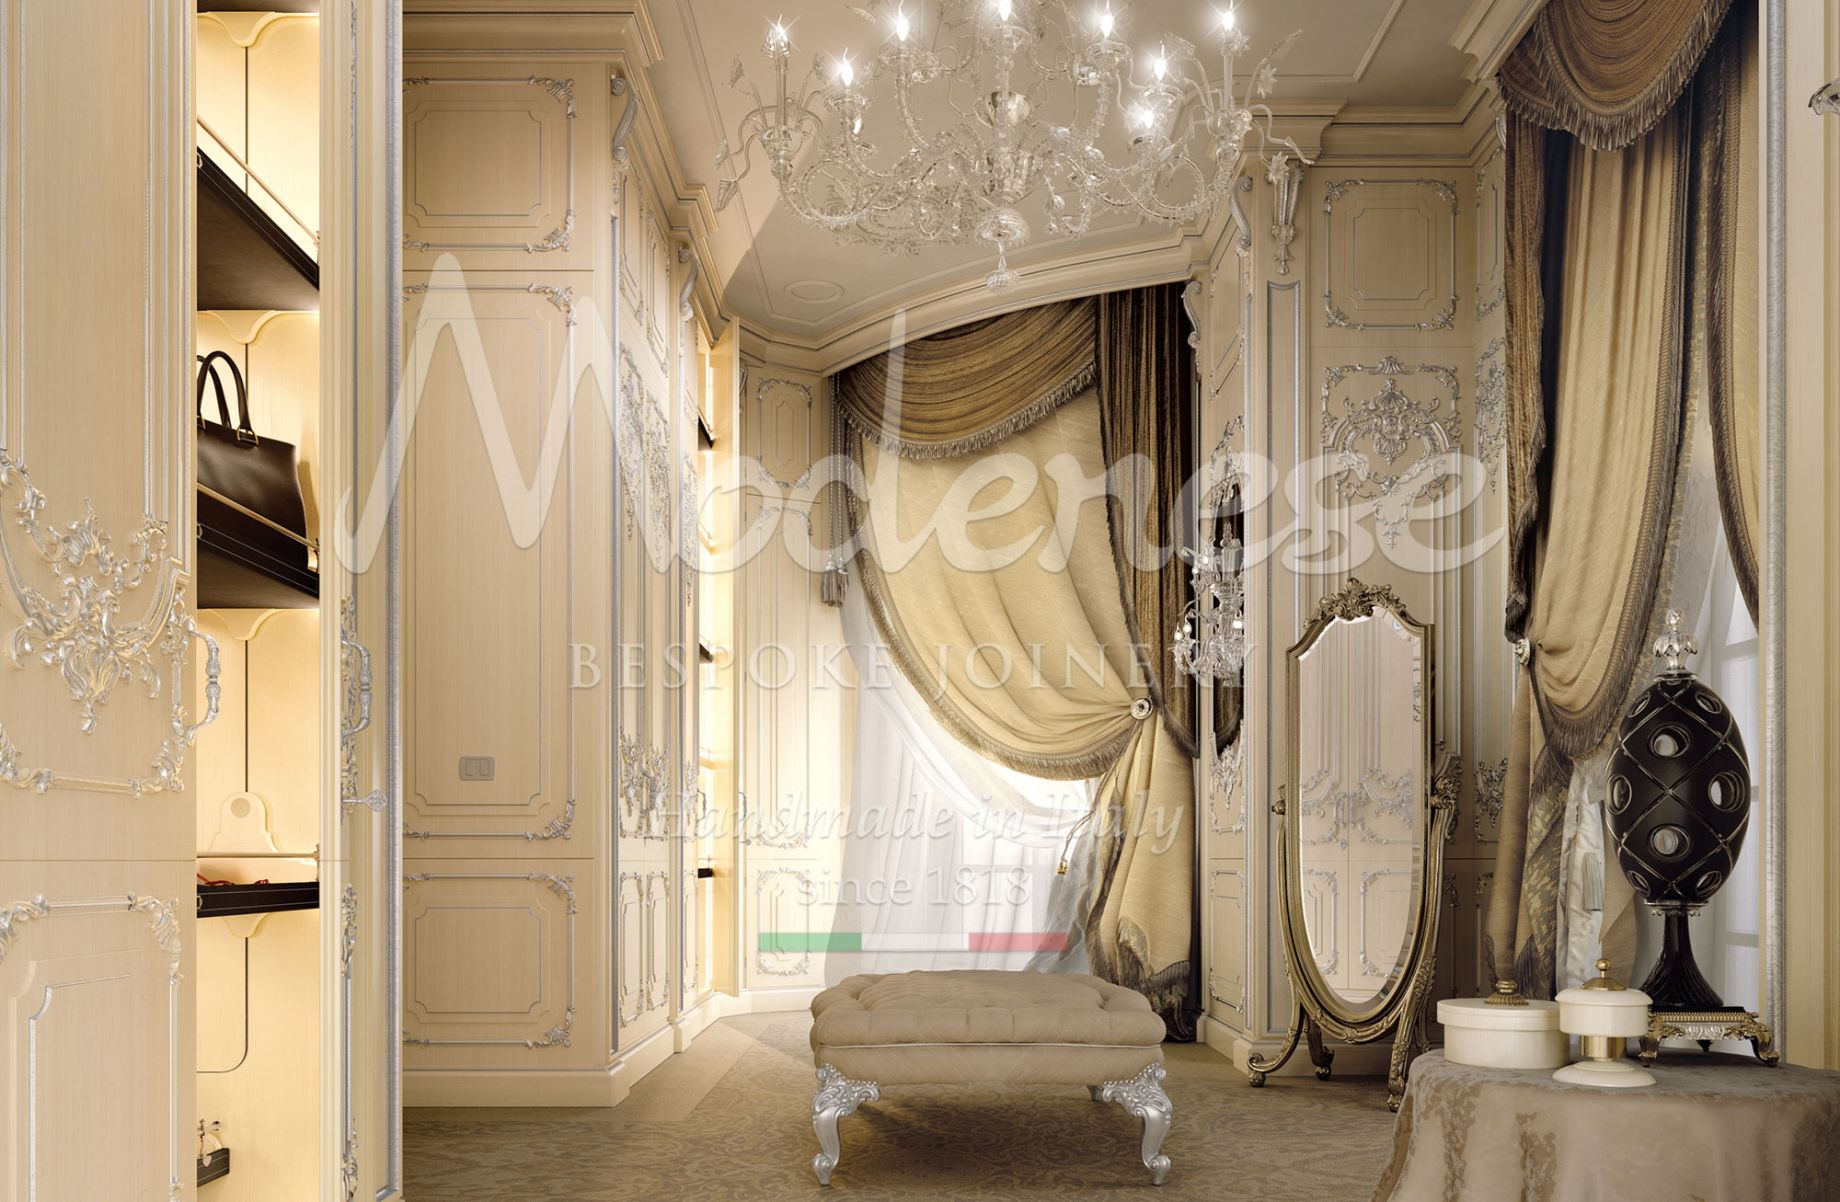 high-end-wardrobe-with-elegant-silver-finishes-and-luxurious-mirror